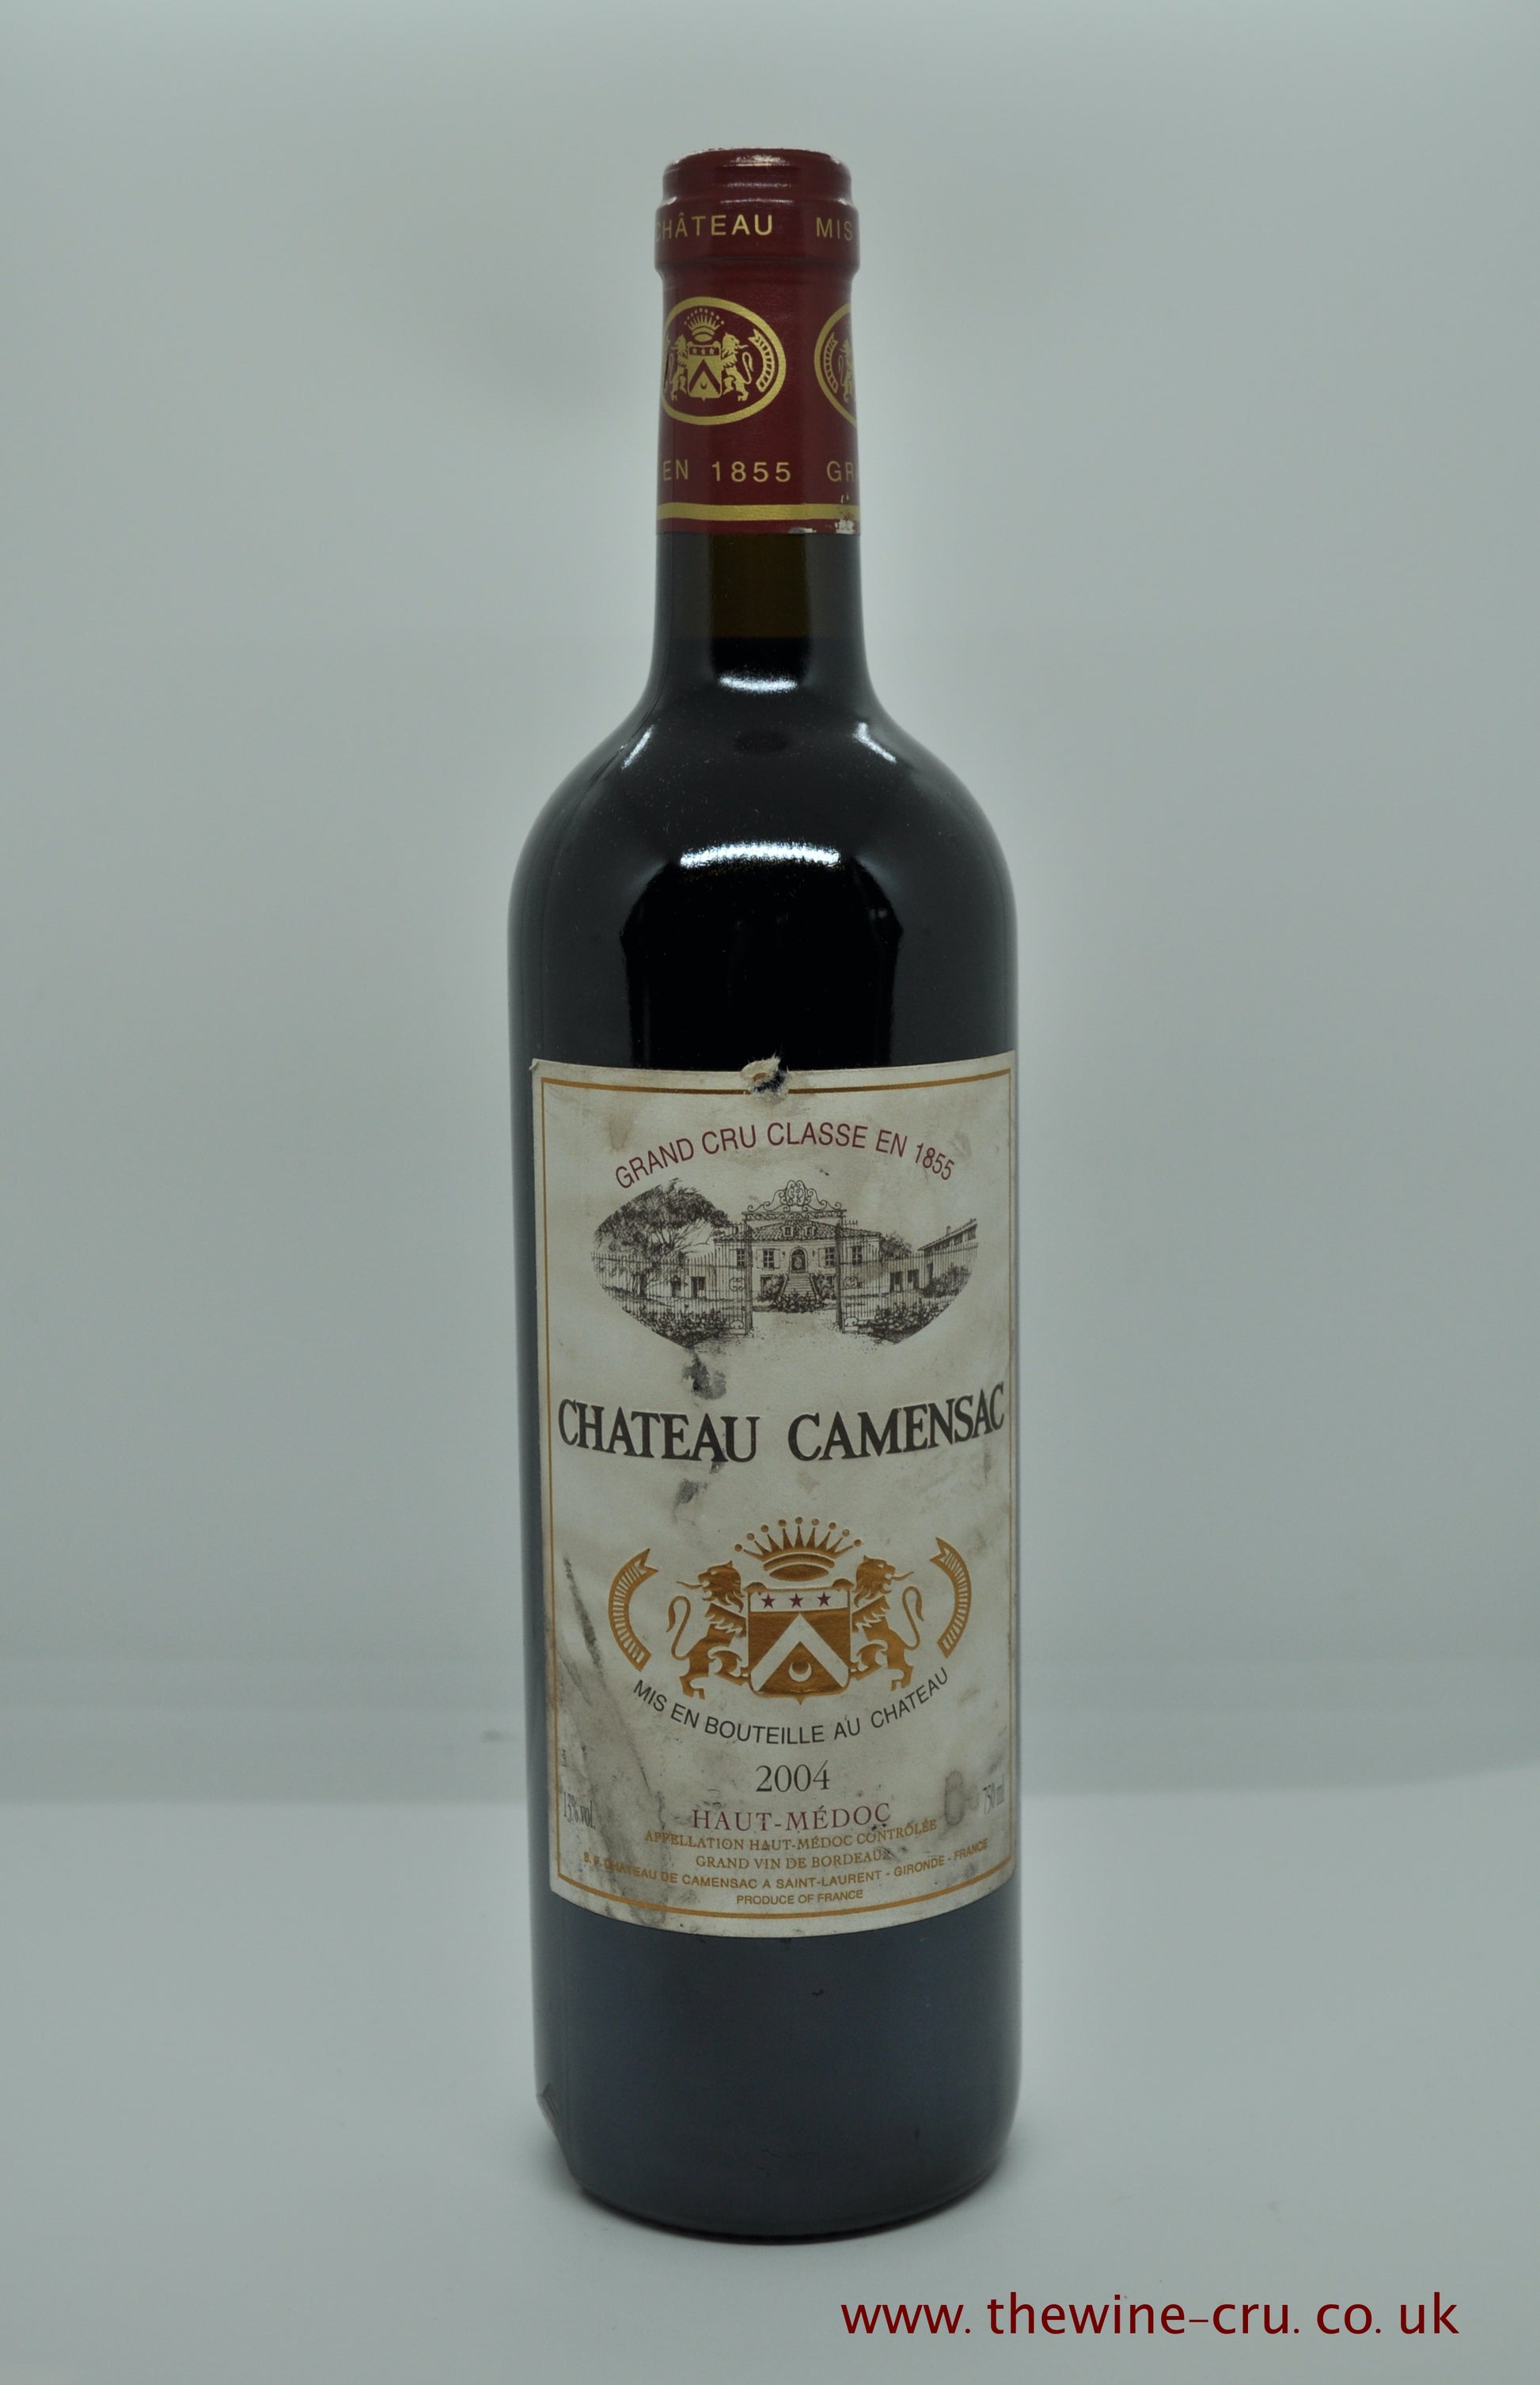 2004 vintage red wine. Chateau Camensac 2004. France Bordeaux. Immediate delivery. Free local delivery.